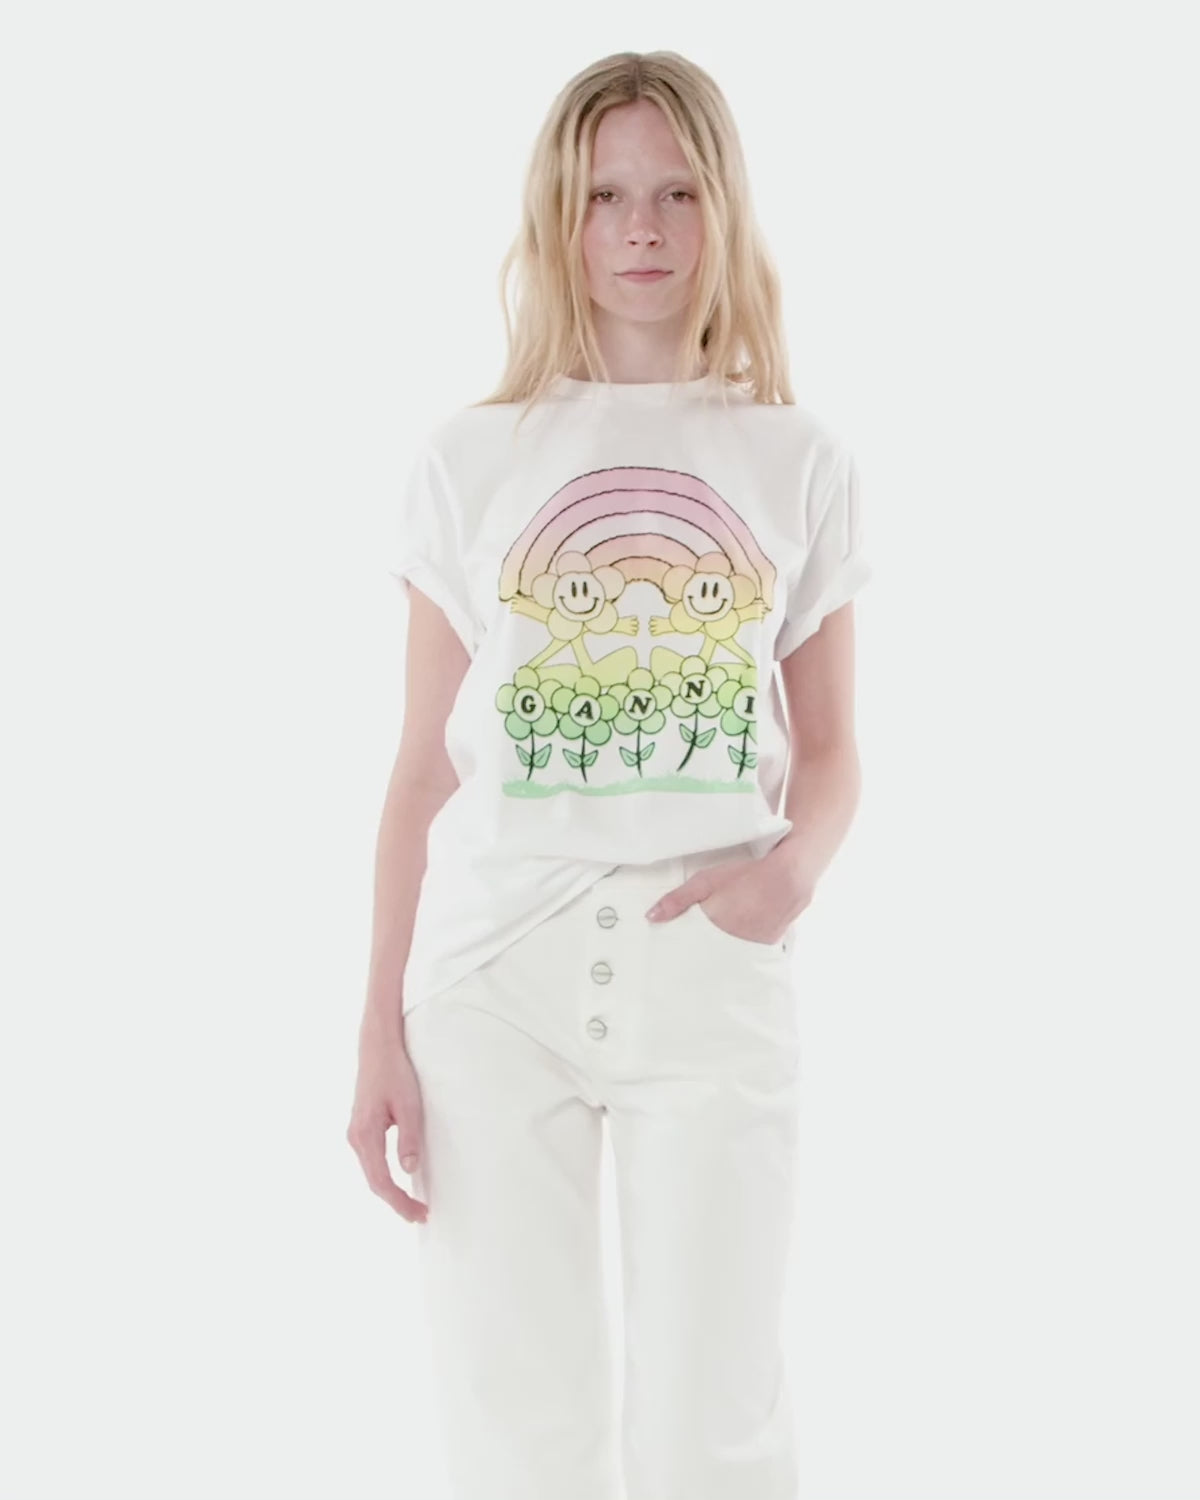 Basic Jersey Rainbow Relaxed T-shirt - Bright White